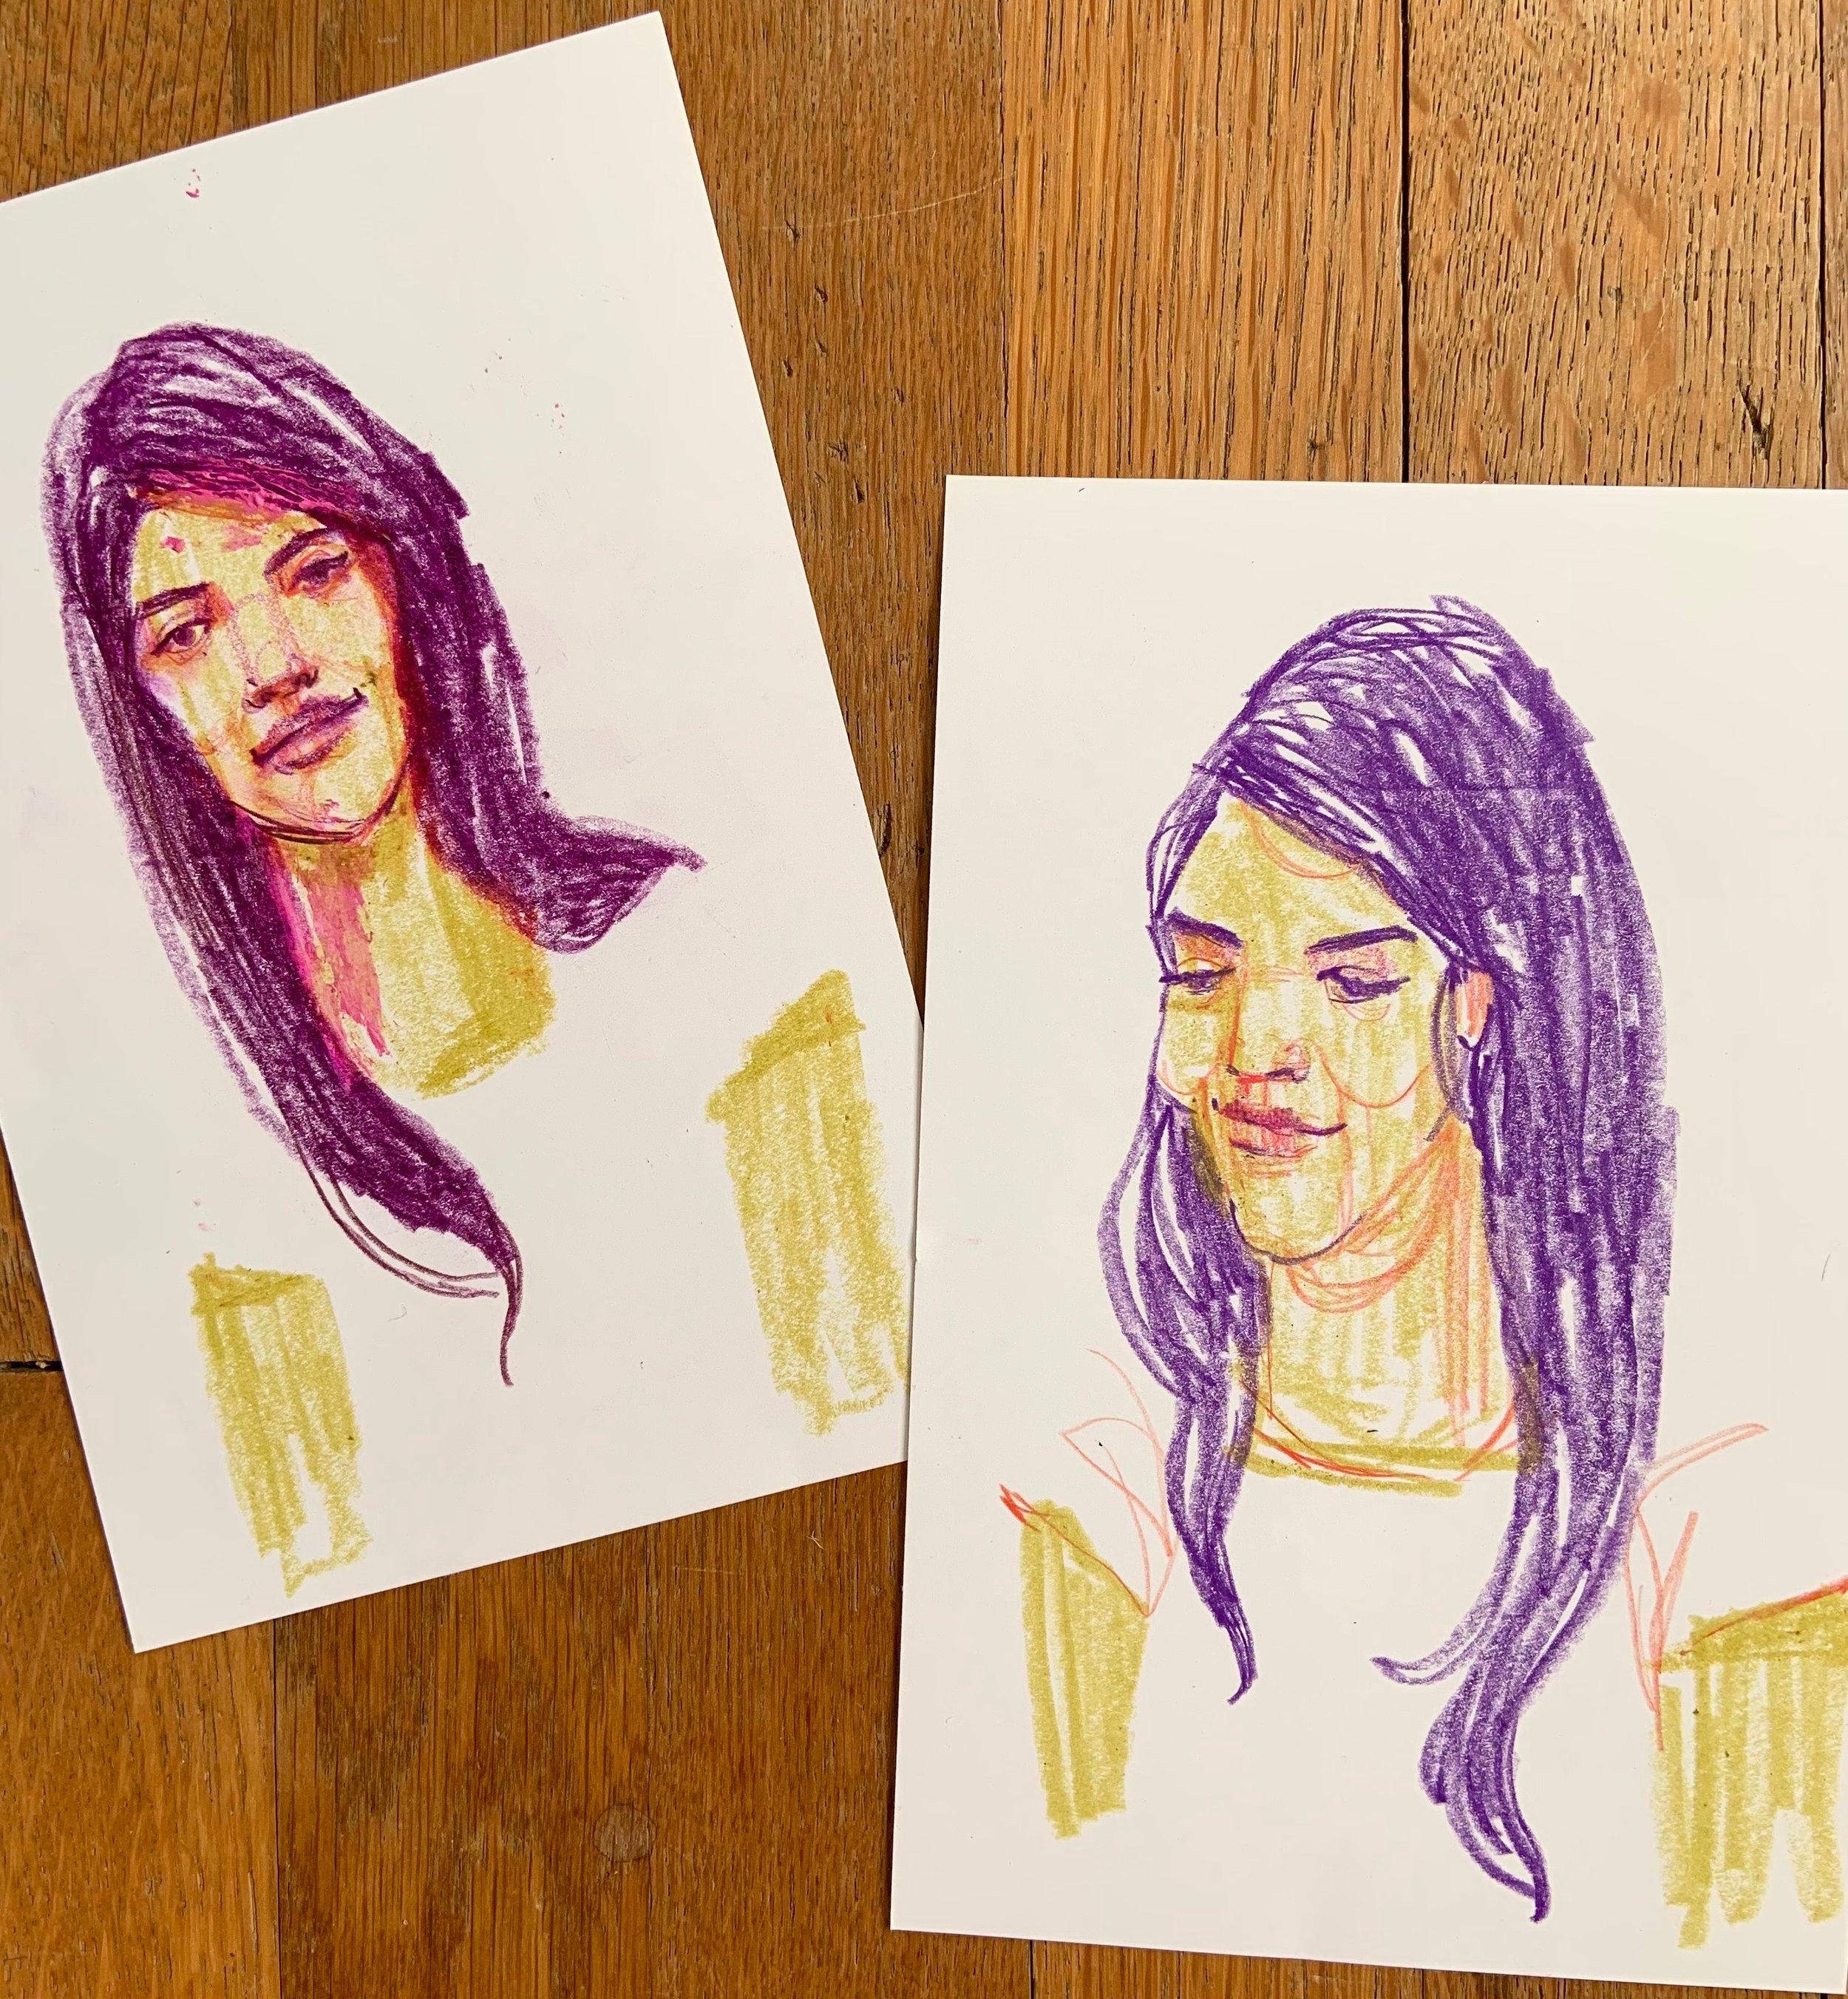  quick sketches of my friend, Ariane, during zoom chats. colored pencil &amp; paint sticks 